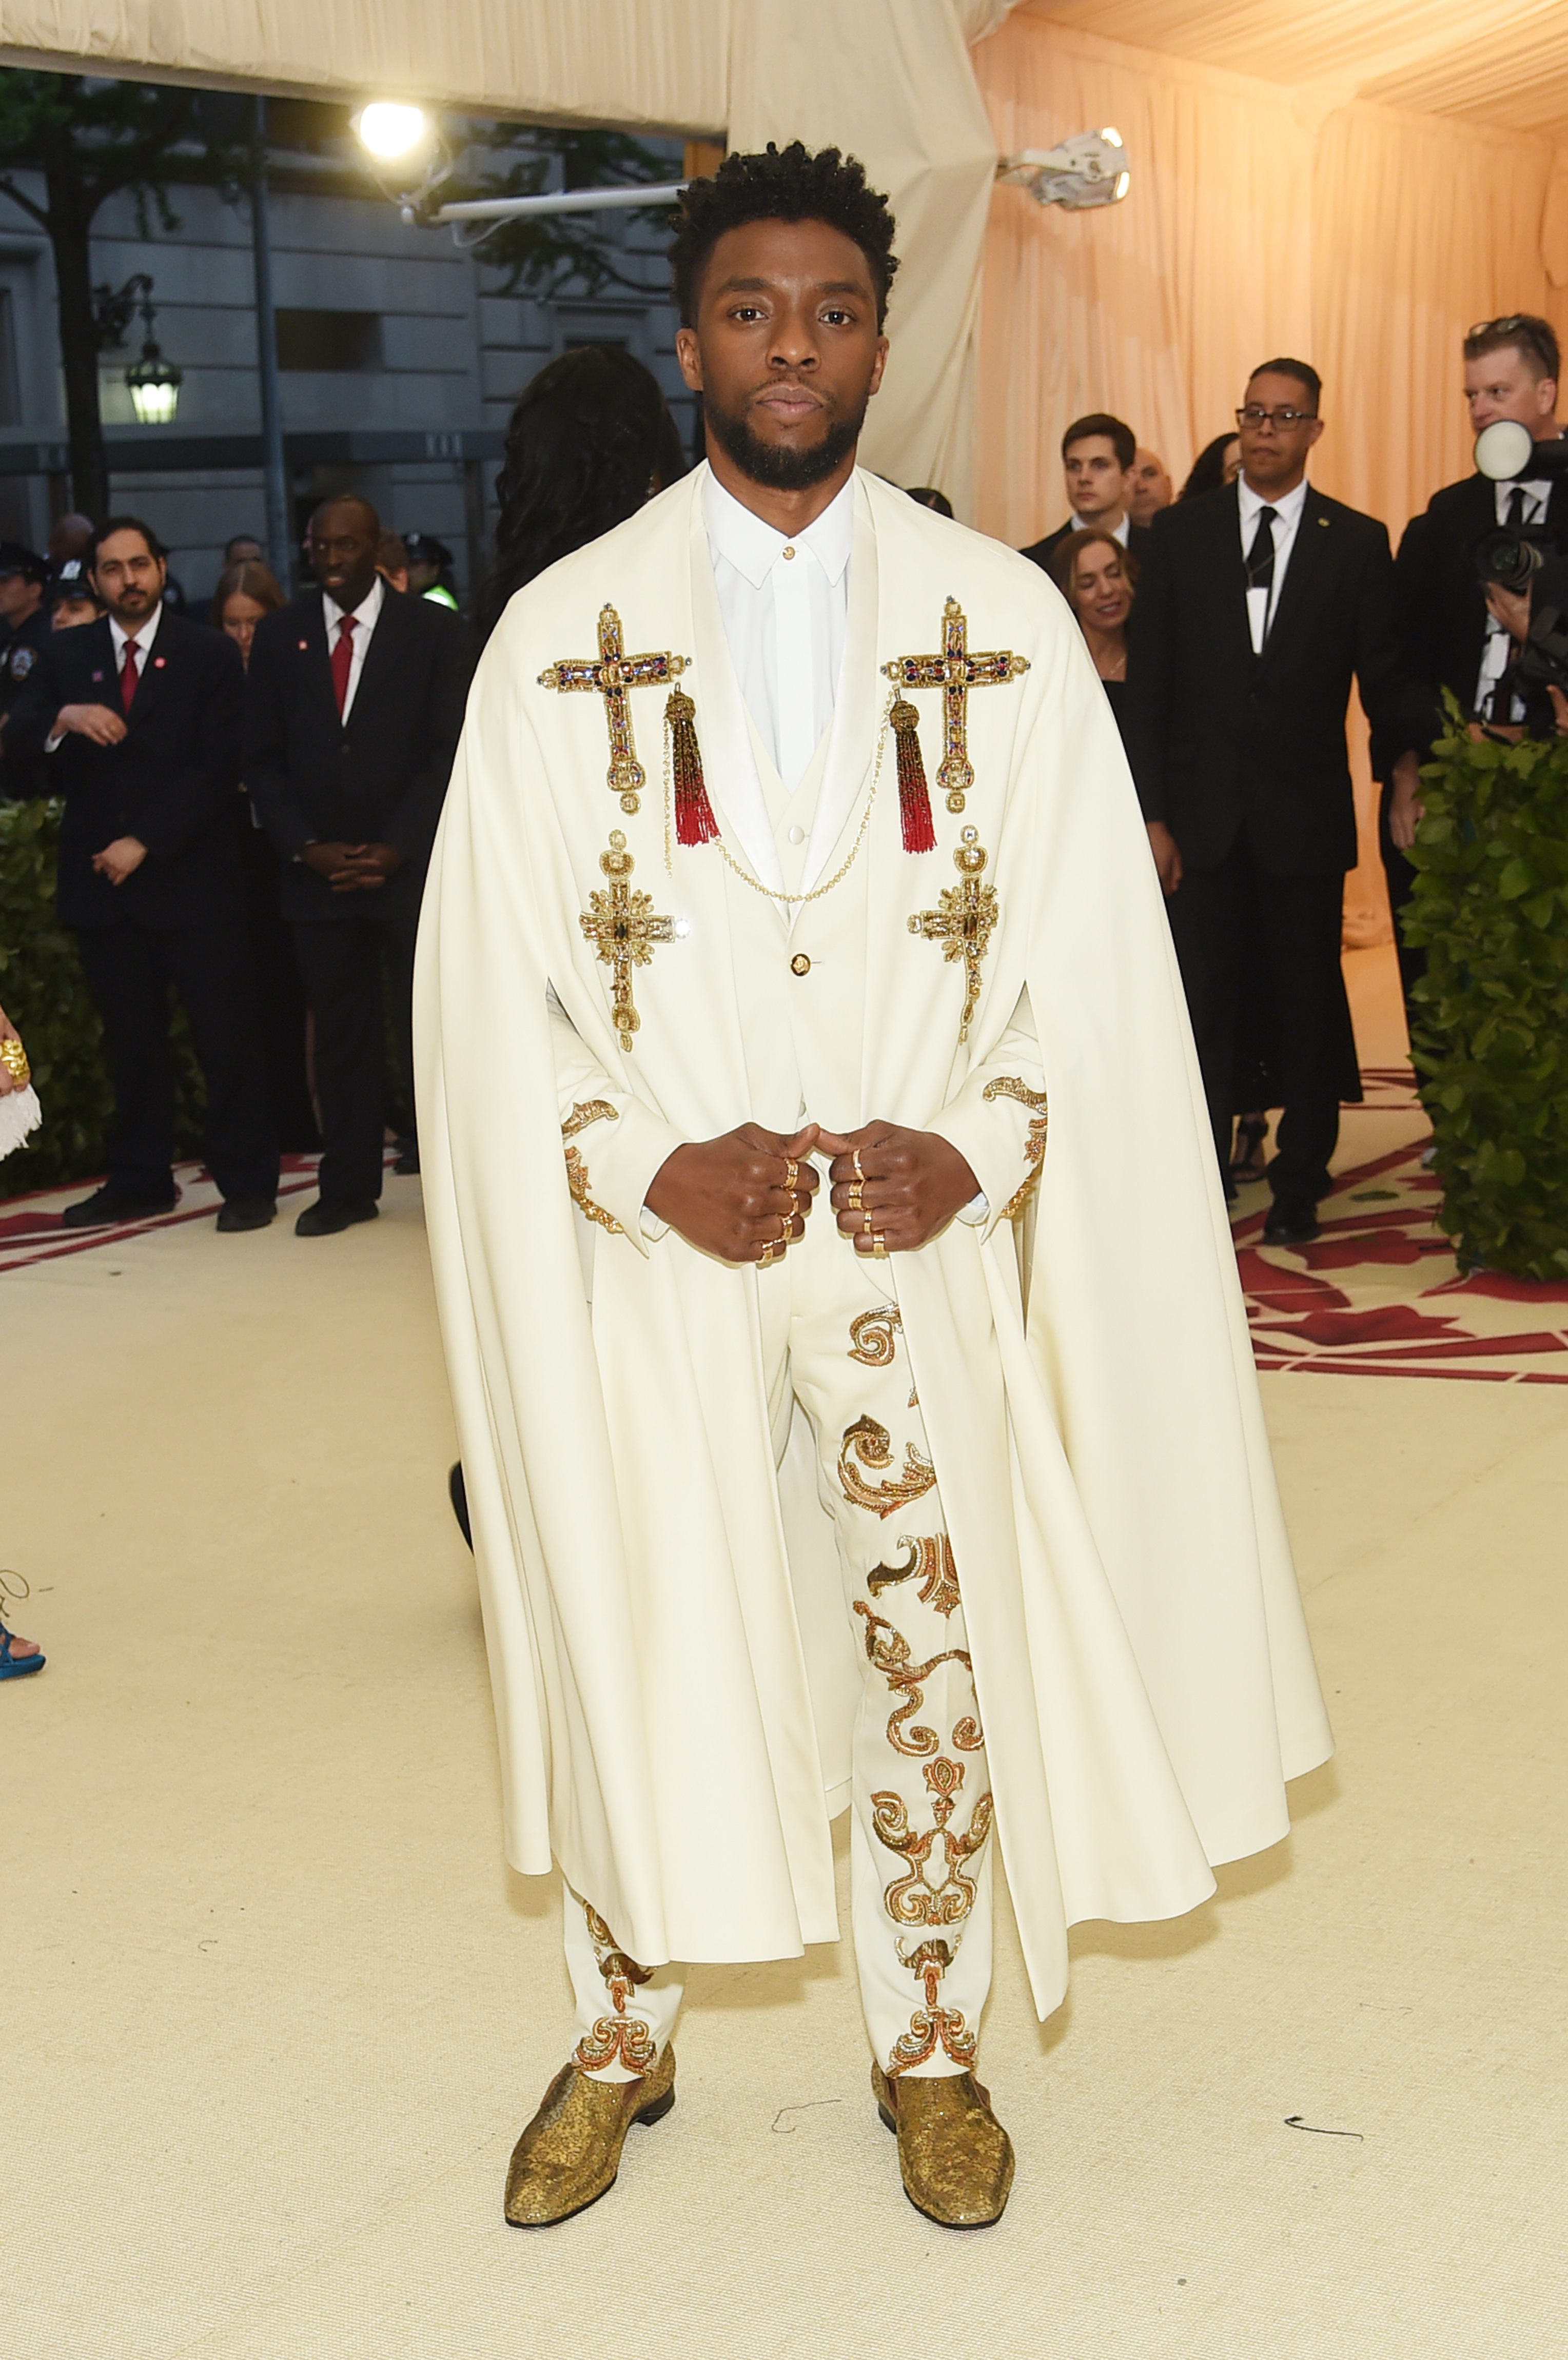 Chadwick Boseman attends the Heavenly Bodies: Fashion & The Catholic Imagination Costume Institute Gala at The Metropolitan Museum of Art in New York City, on May 7, 2018. | Source: Getty Images